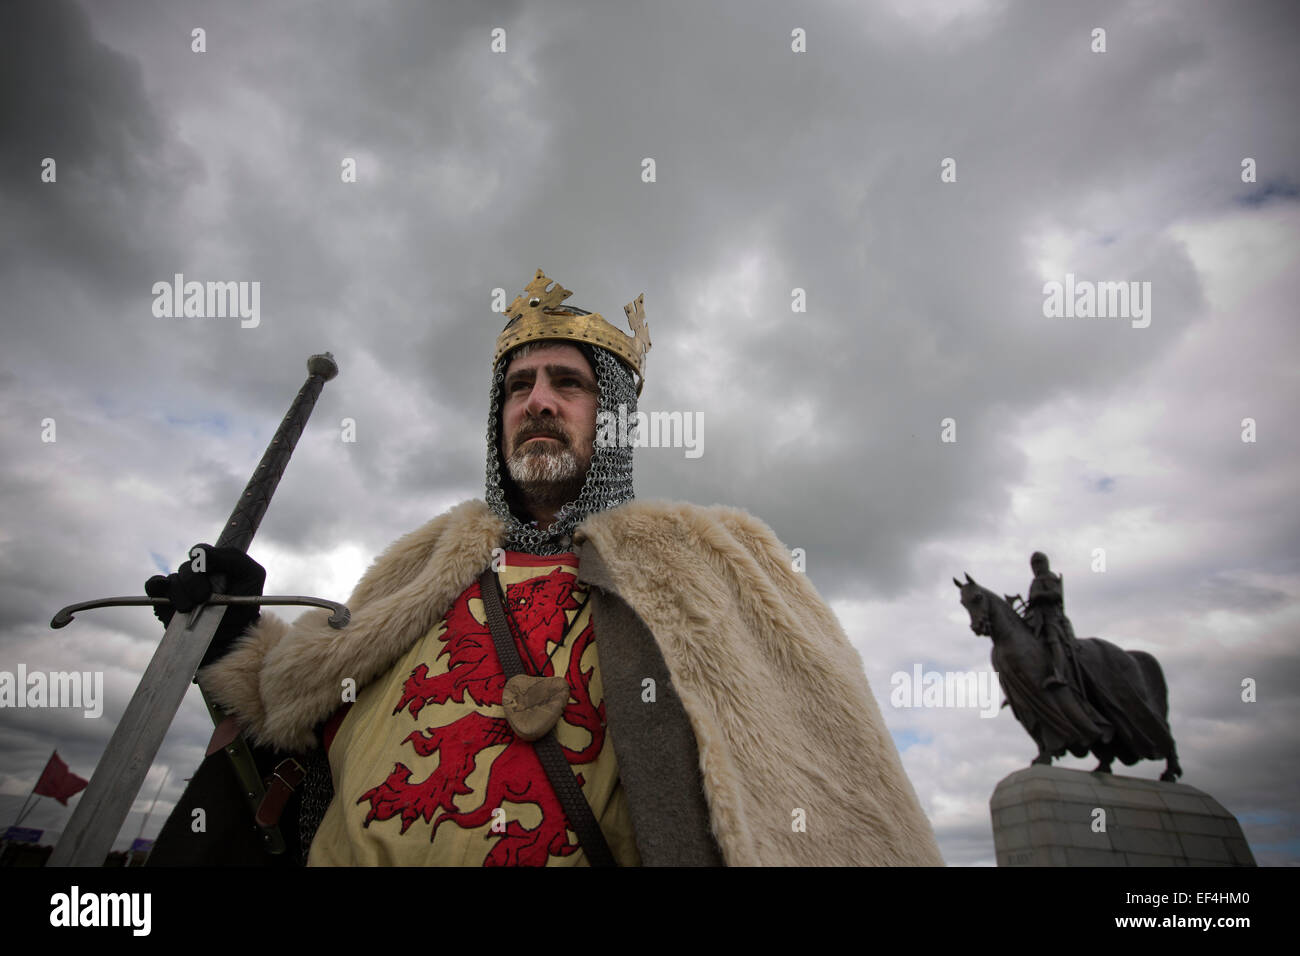 Roy Ramsay dressed as Robert the Bruce pictured prior to taking part in a battle scene at Bannockburn Live, Scotland. Stock Photo